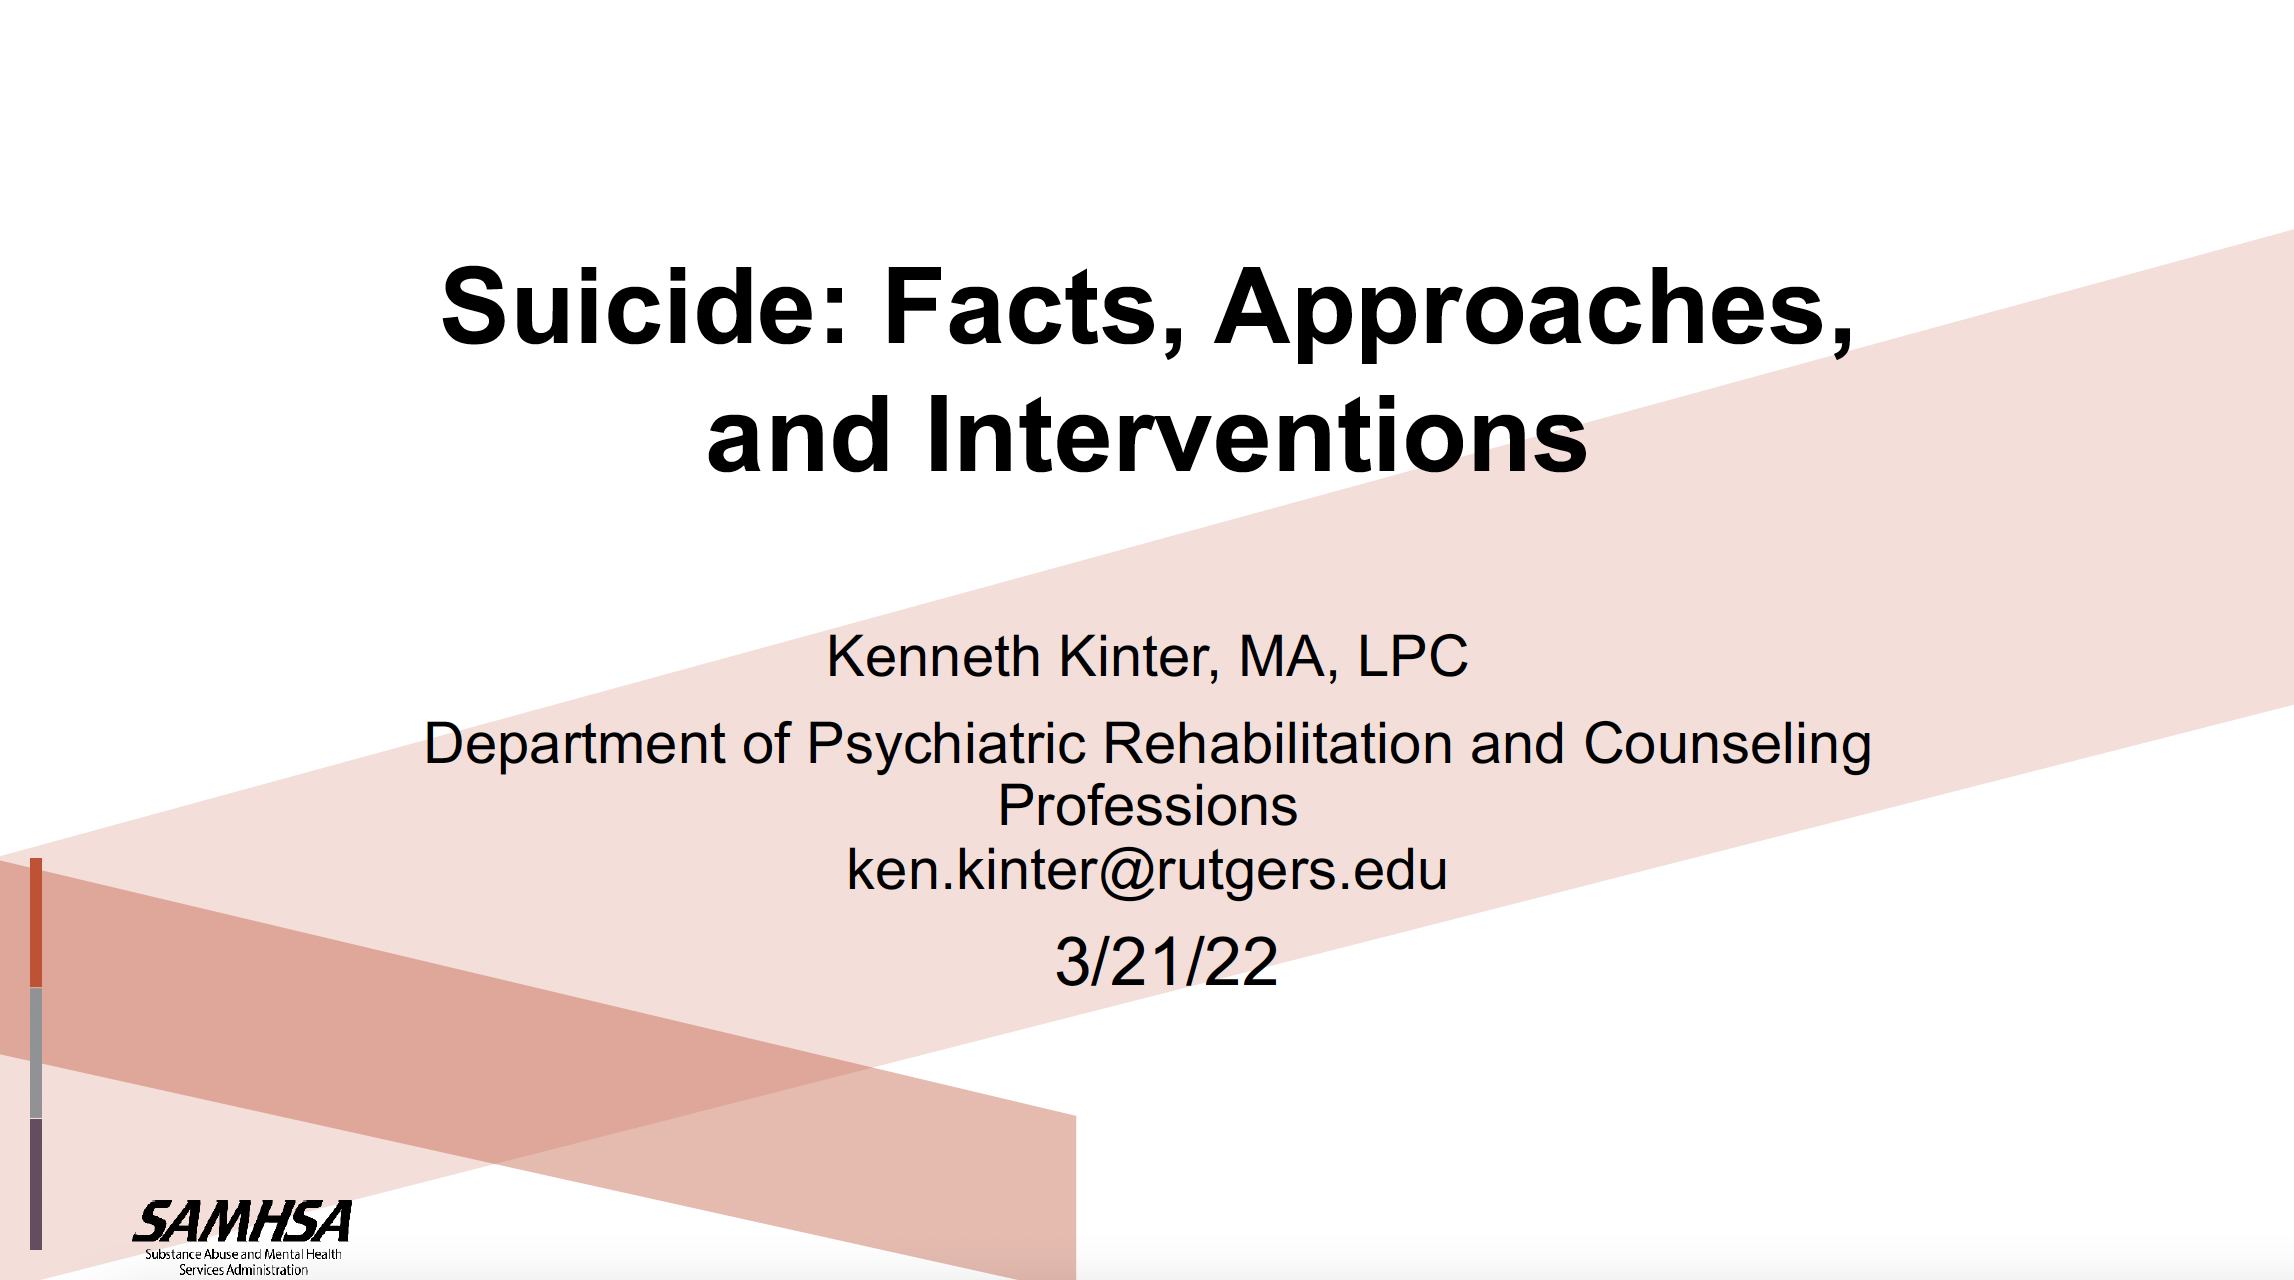 Suicide: Facts, Approaches, and Interventions